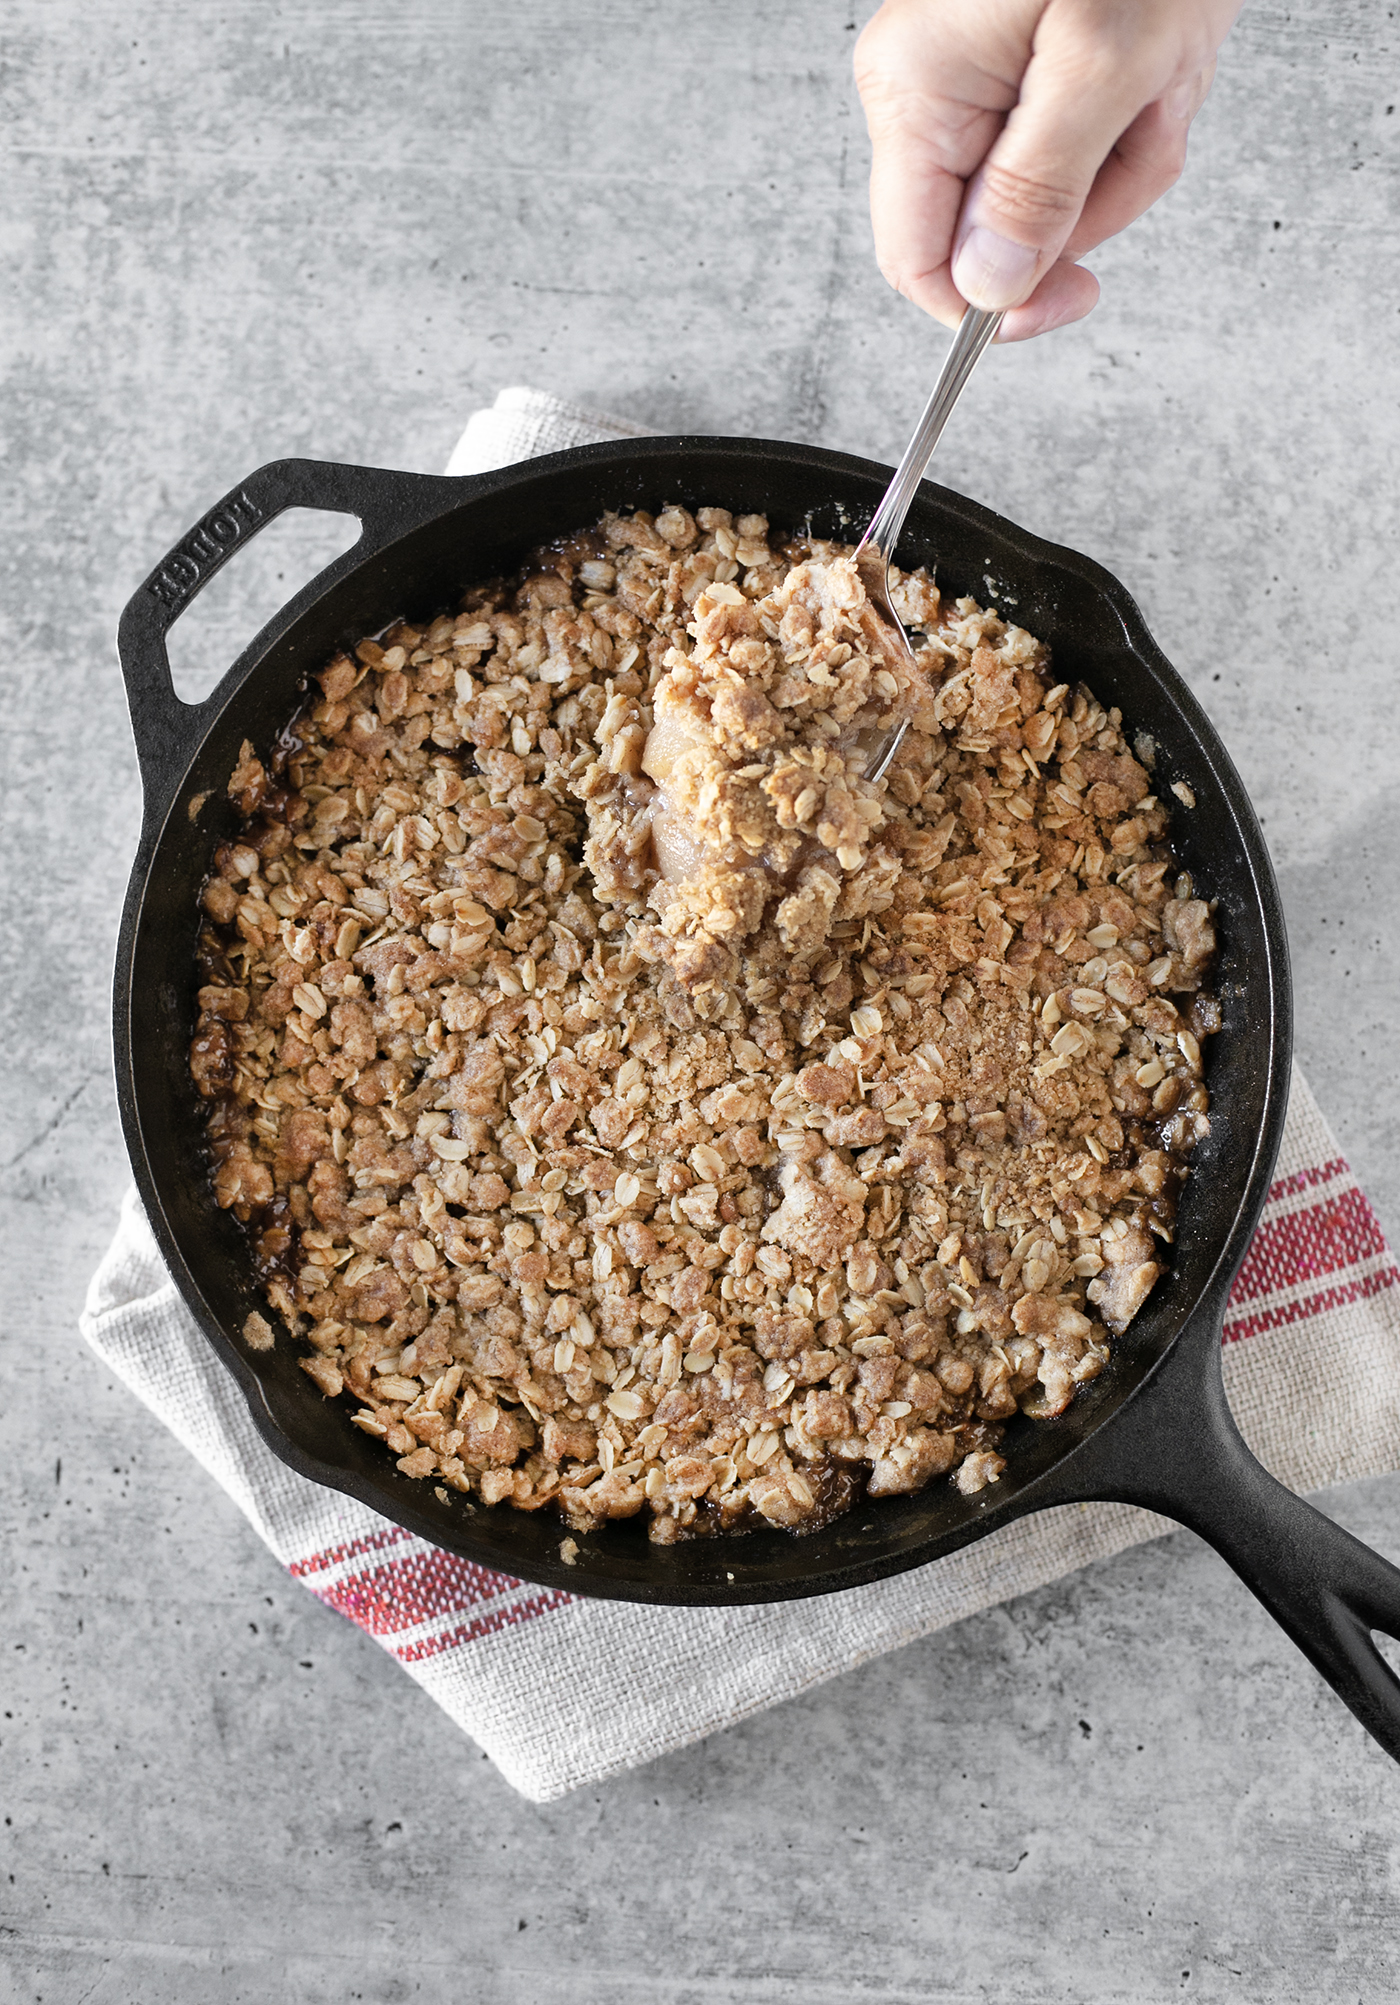 Scooping out the apple crisp from cast iron pan